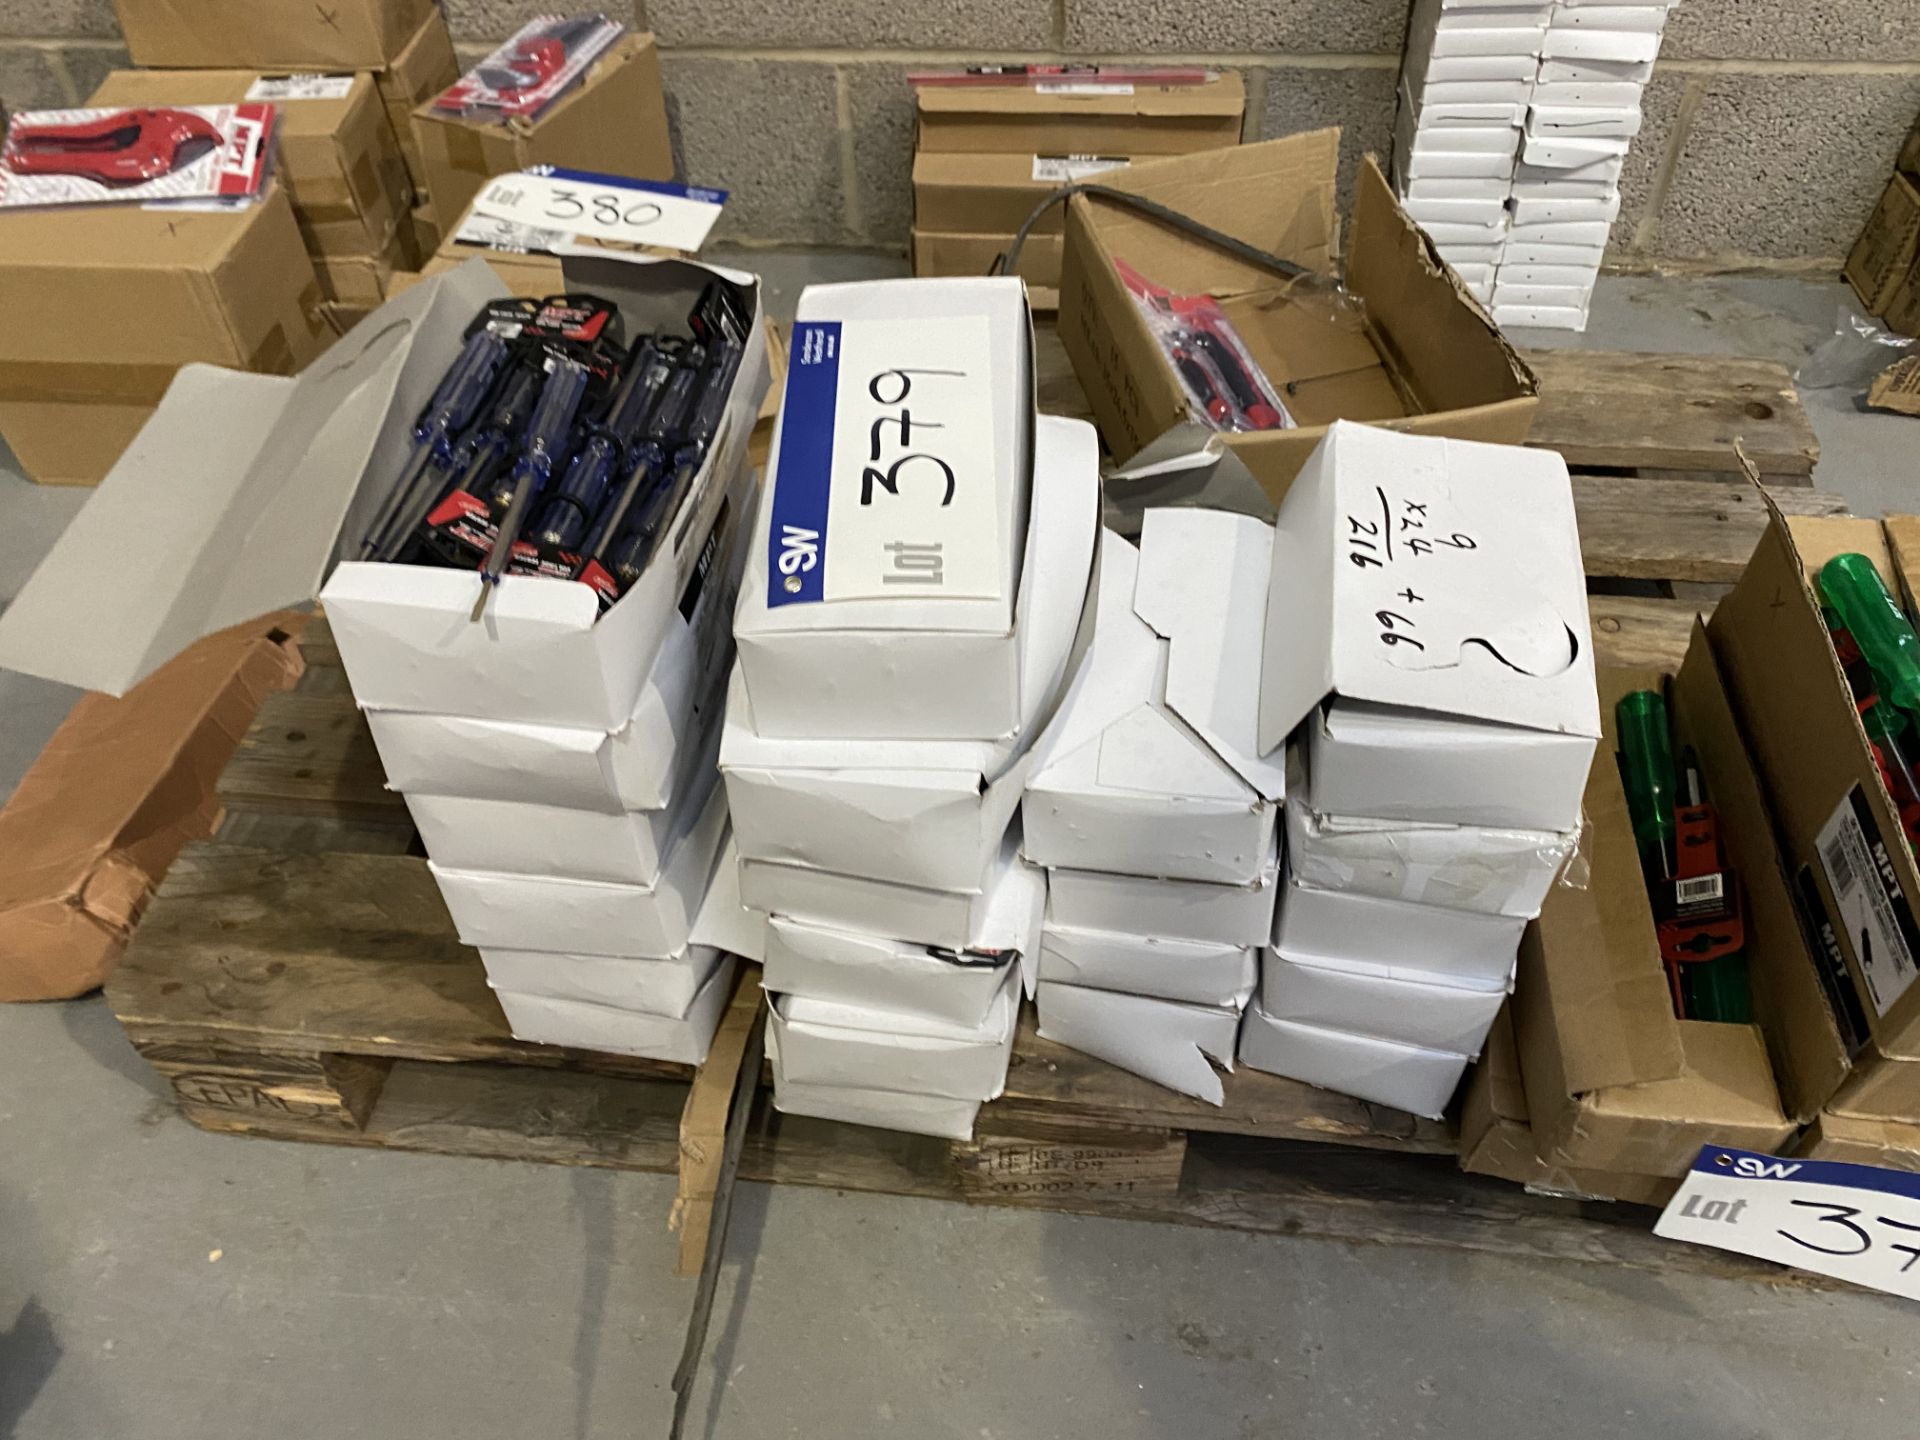 21 Boxes of MPT Voltage Testers